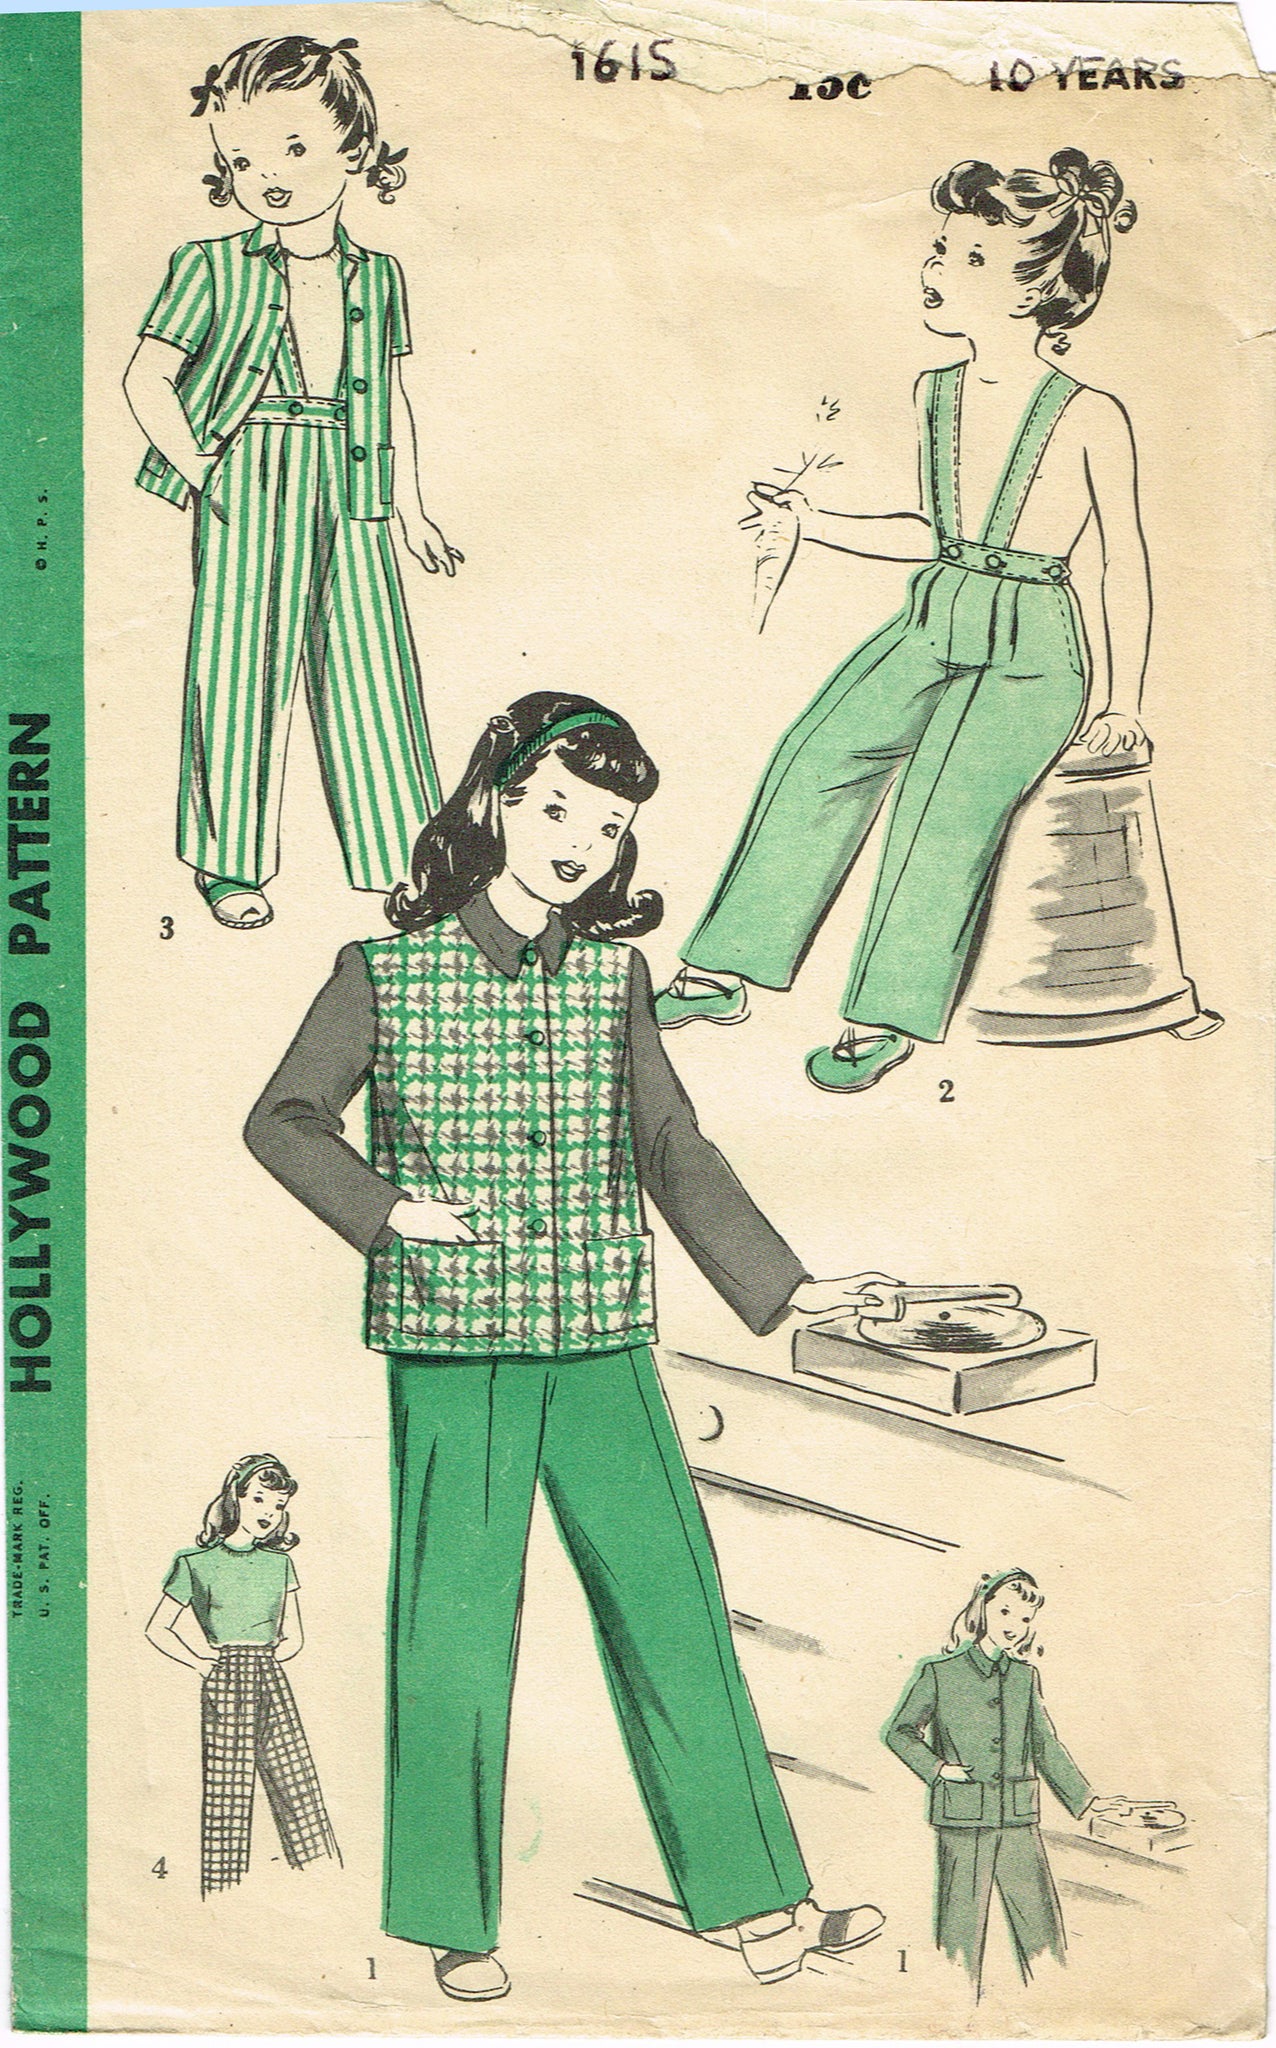 Amazon.com: Butterick Sewing Pattern 3599 Misses Size 8-12 Easy Jacket  Straight Skirt Pants Suit Pantsuit : Arts, Crafts & Sewing